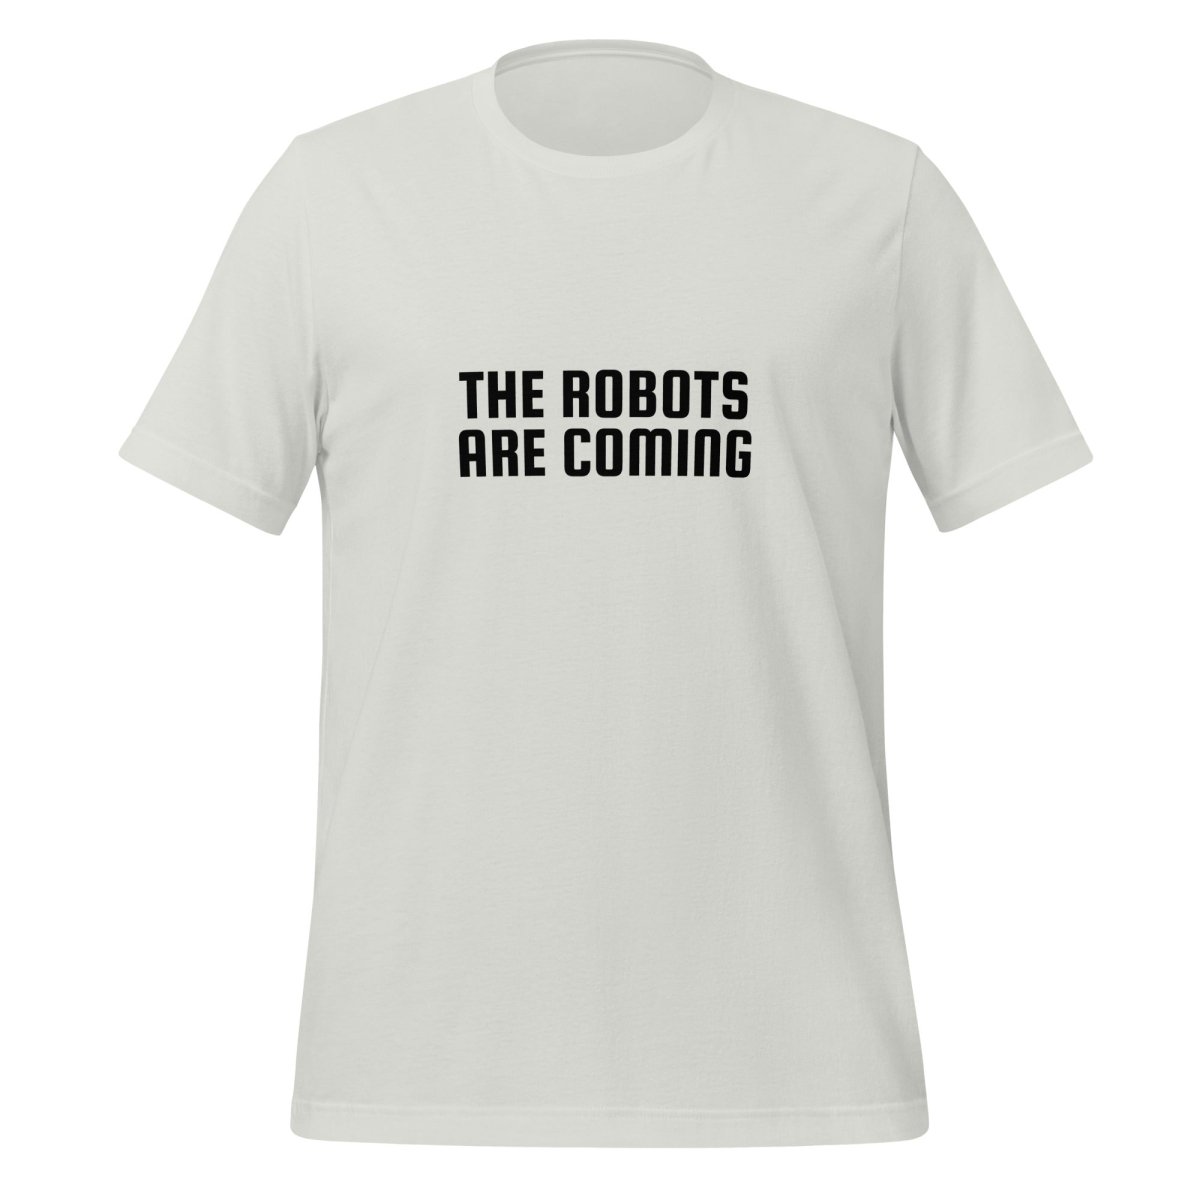 The Robots Are Coming in Black T - Shirt 2 (unisex) - Silver - AI Store